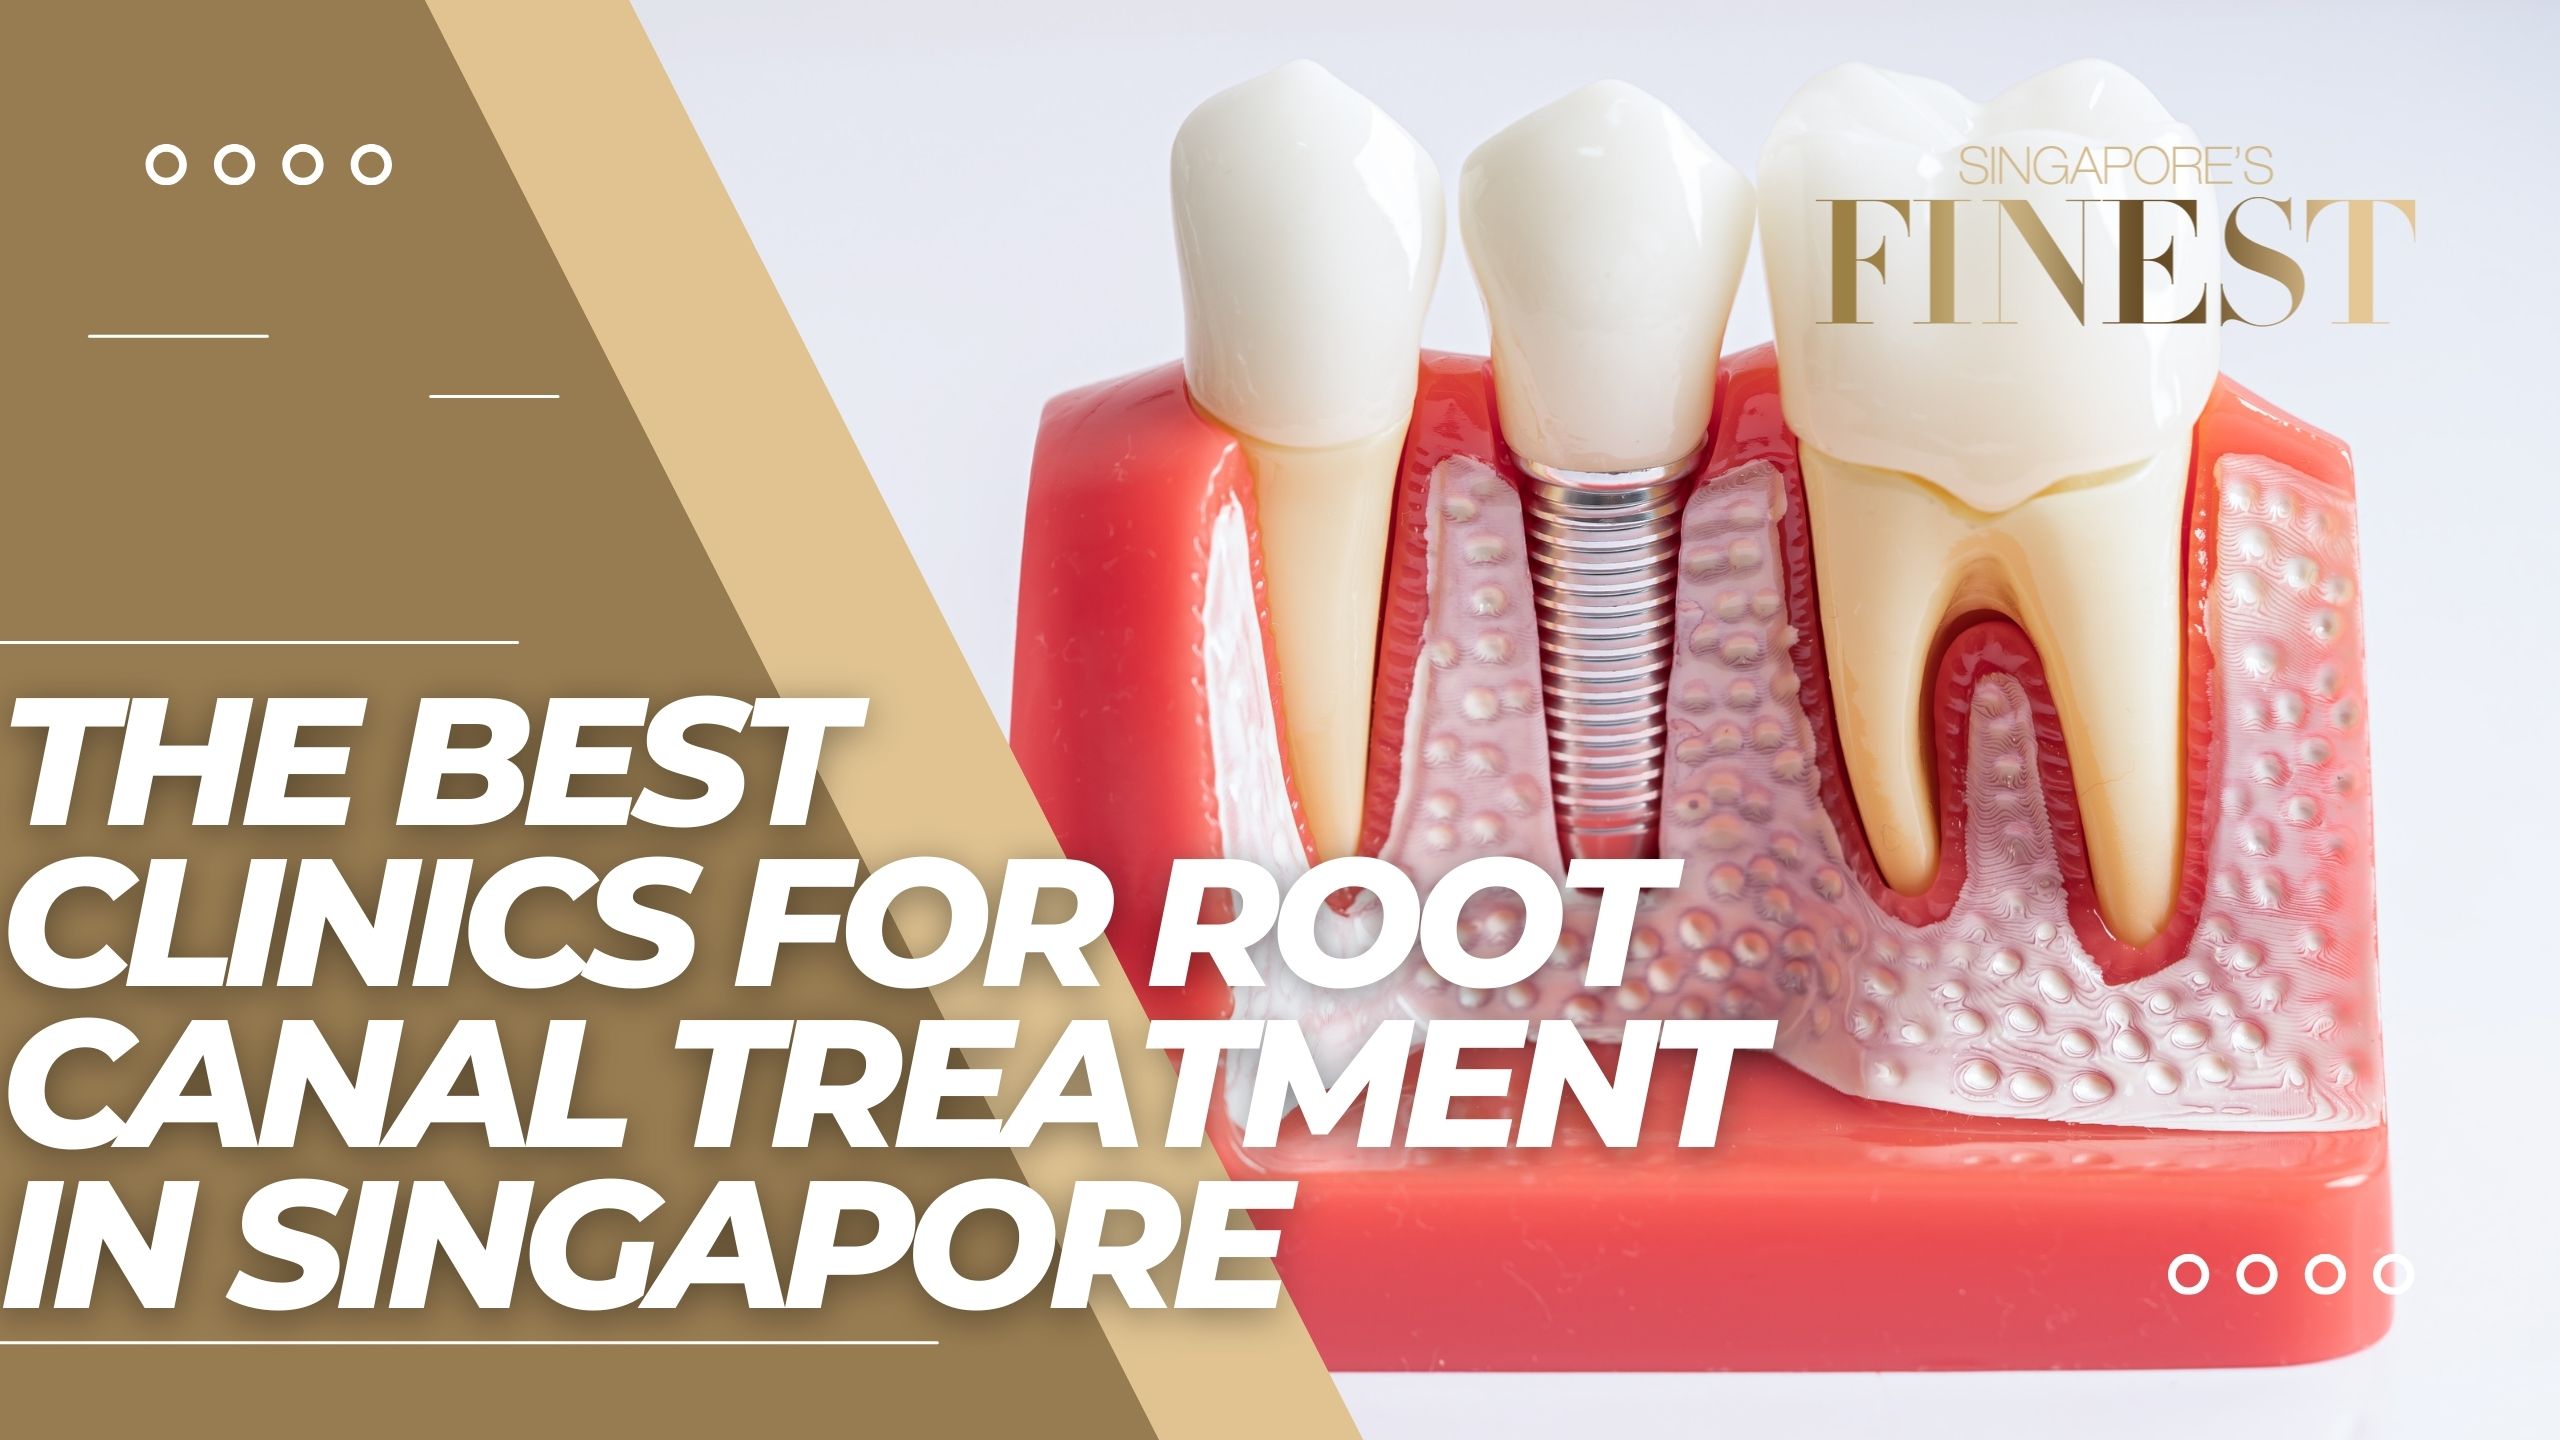 The Finest Clinics for Root Canal Treatment in Singapore